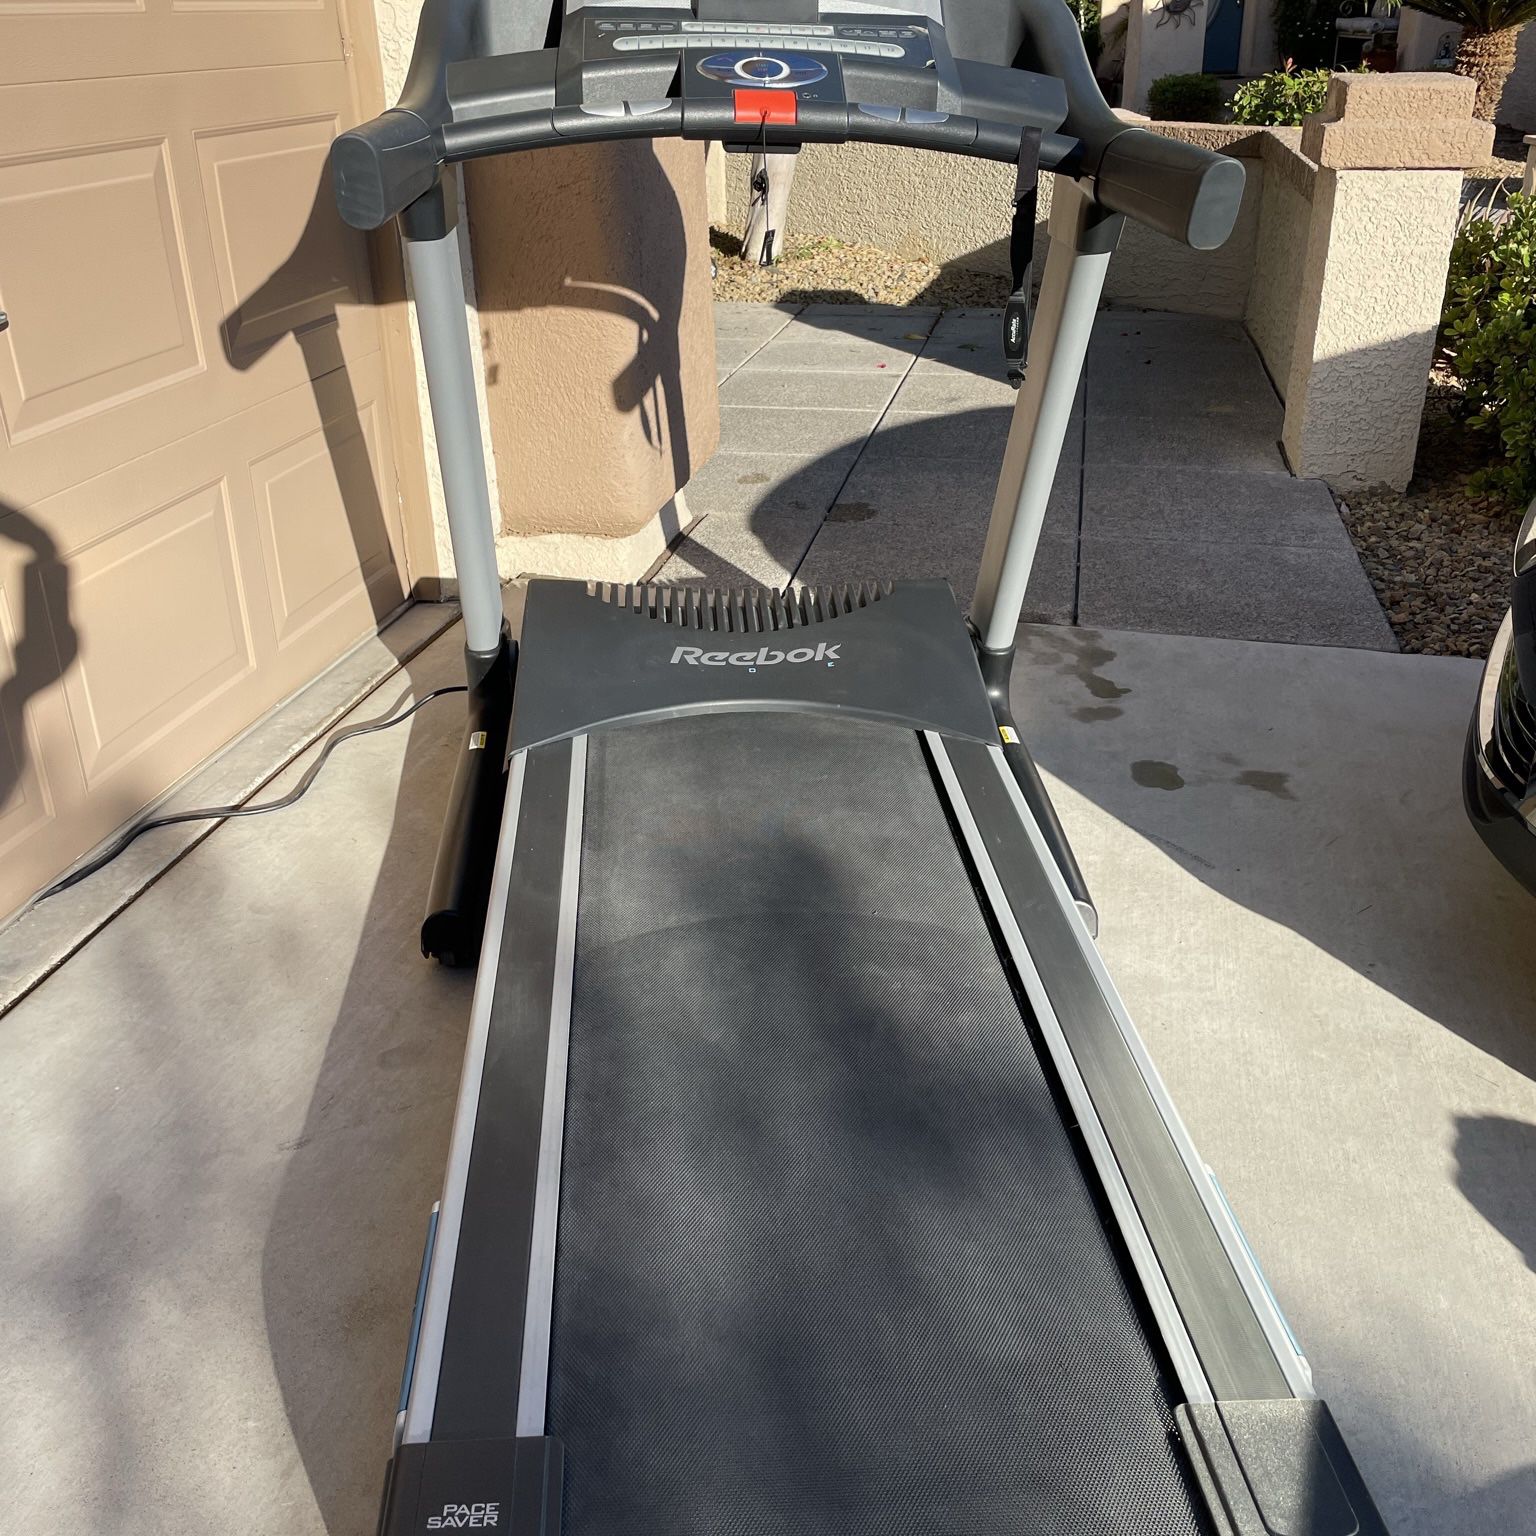 Reebok 9500ES Treadmill - Price Reduced For Quick Sale!